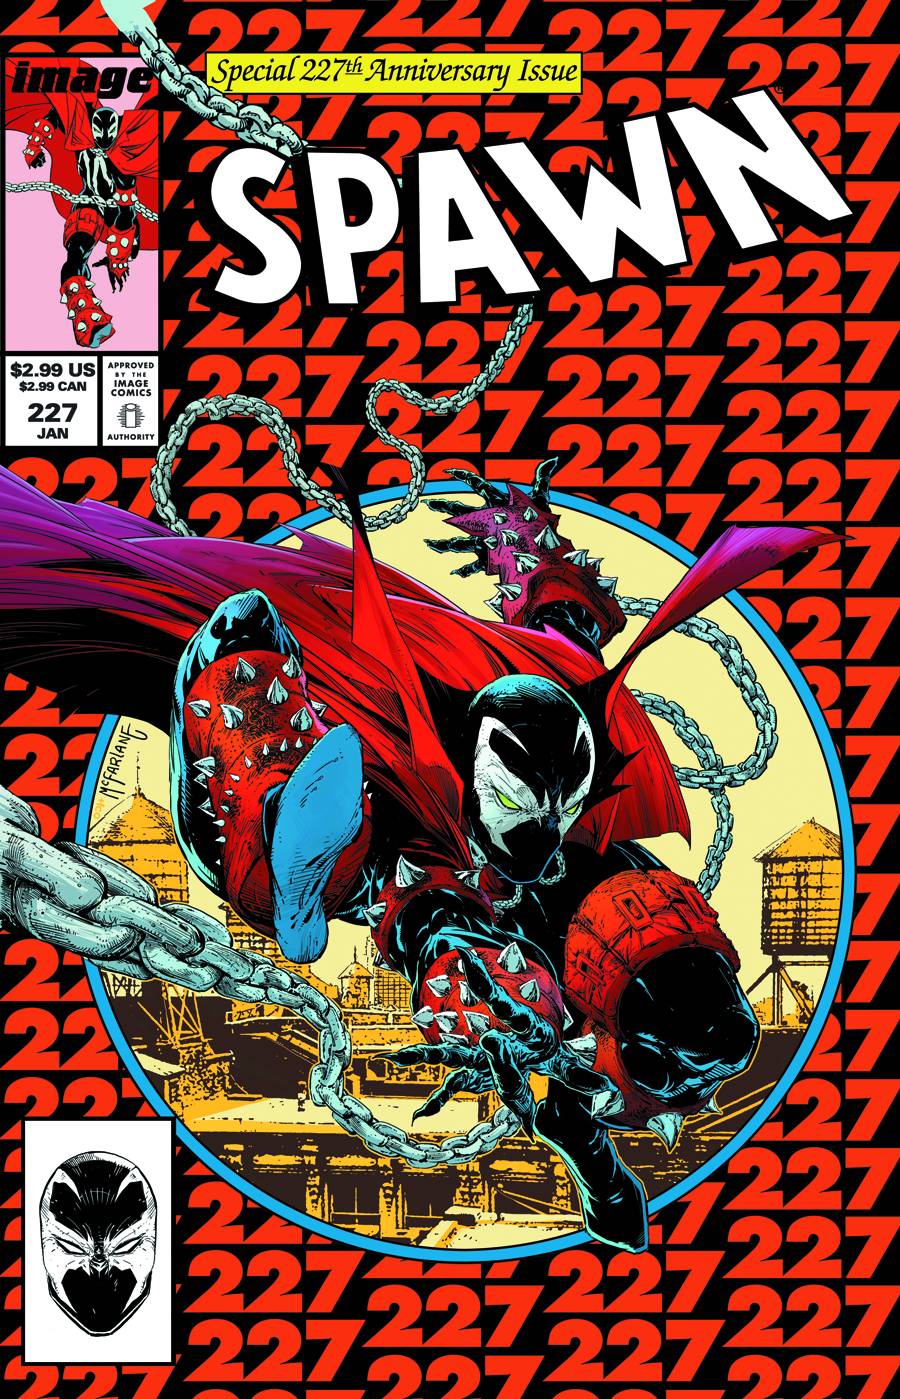 Spawn #227: Cover by TODD McFARLANE